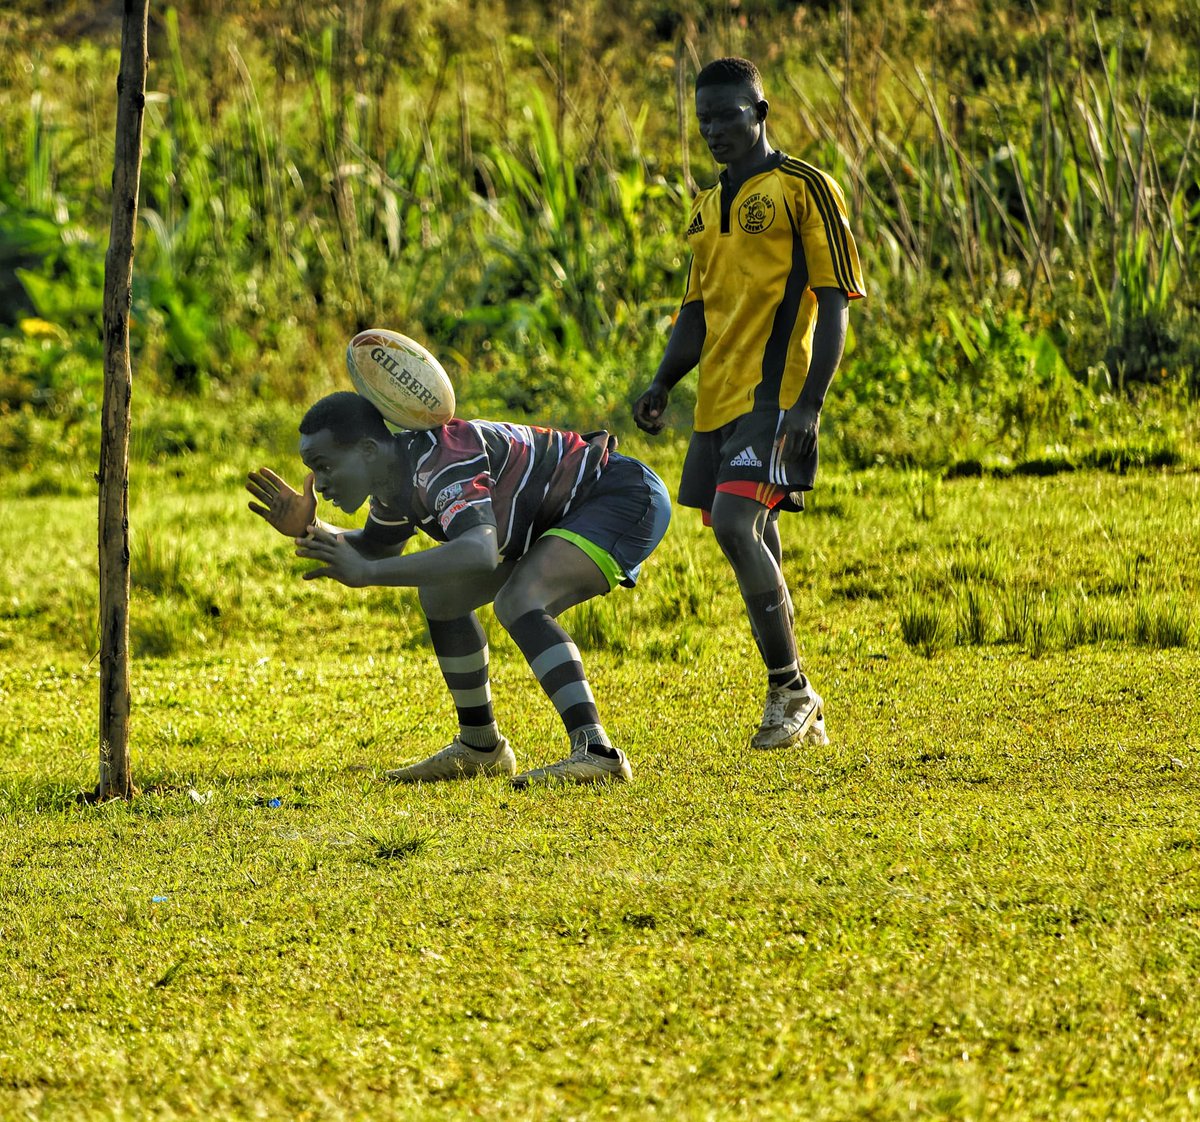 Ronald Madoi is an industrious rugby player who plays for the Wolves. 

Taking the field at his preferred flanker position, Ronald is known for his formidable tackles, powerful ball carries, and relentless work ethic.

📸: @Josh_ekuma

 #KnowYourWolf
#ElgonWolvesRugby
#AmbaEsolo